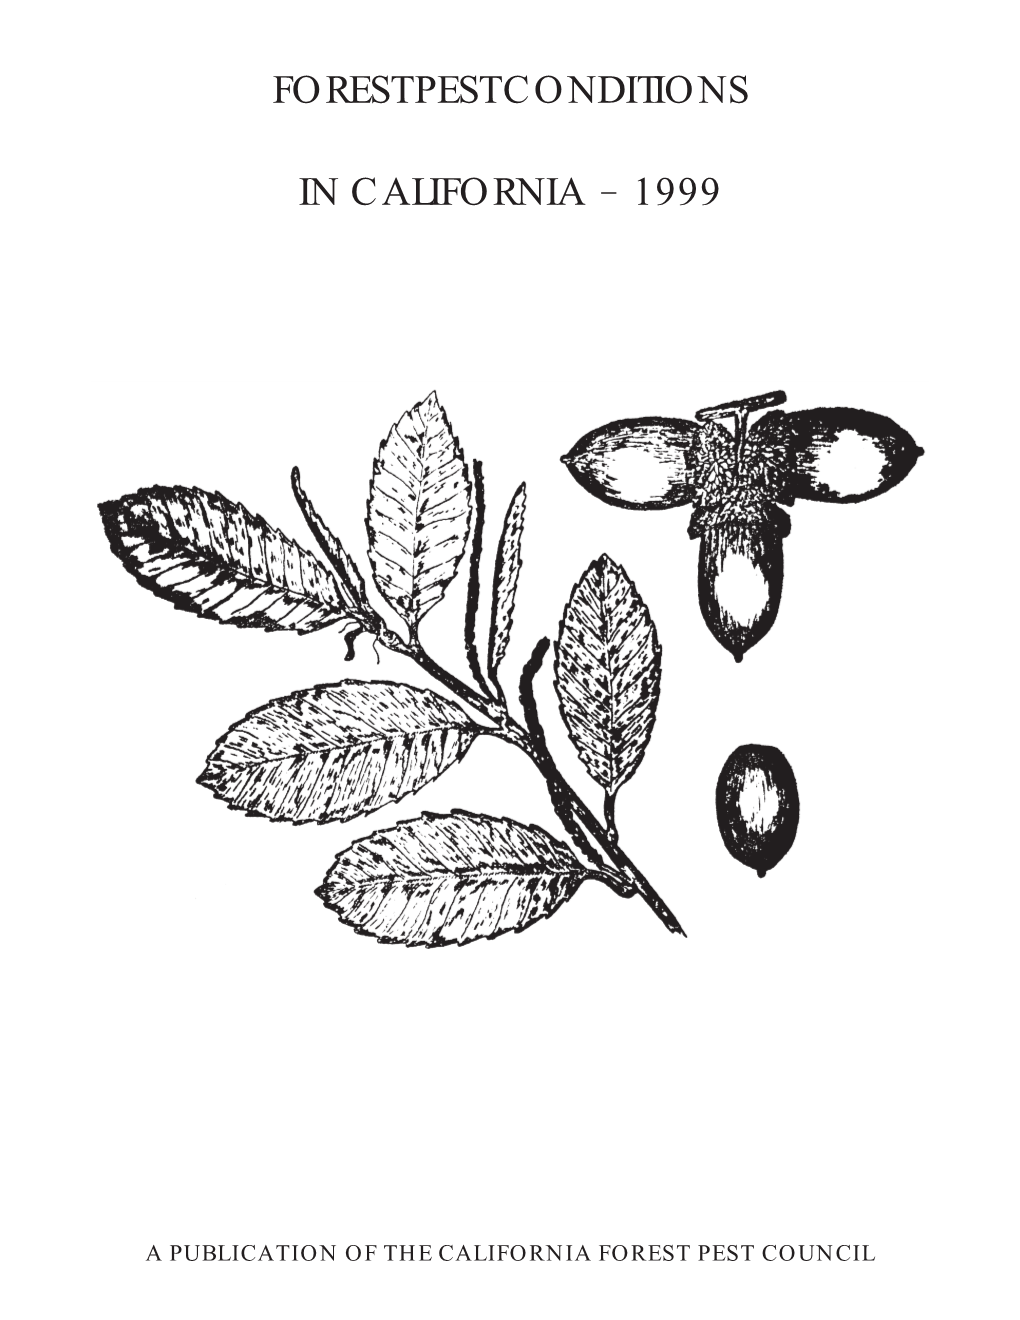 Forest Pest Conditions in California, 1999